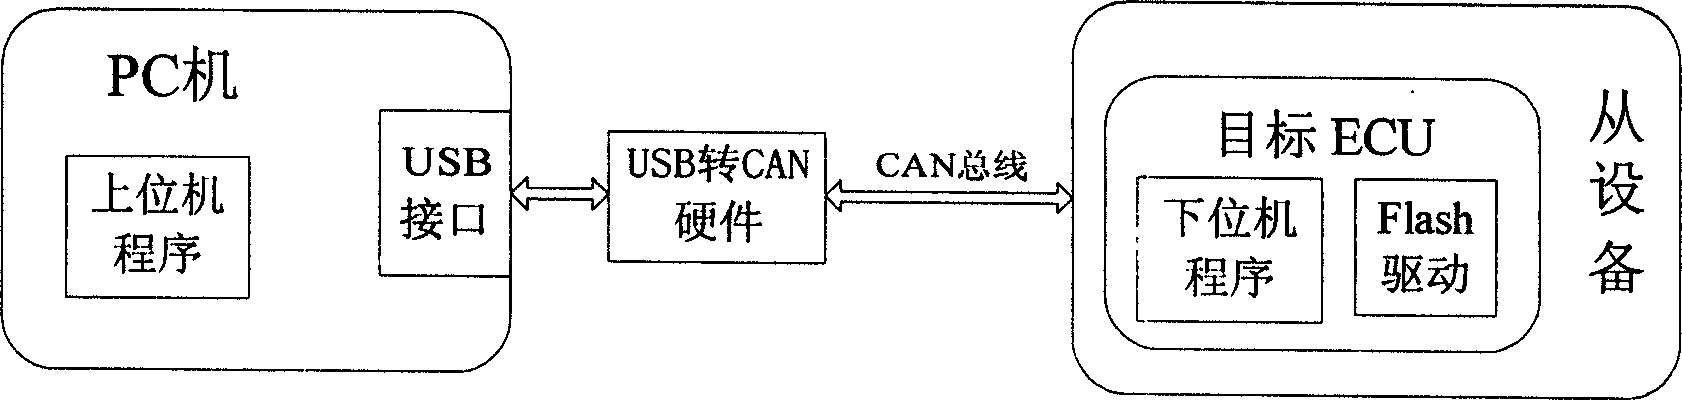 Universal embedded marker and marking method based on CCP